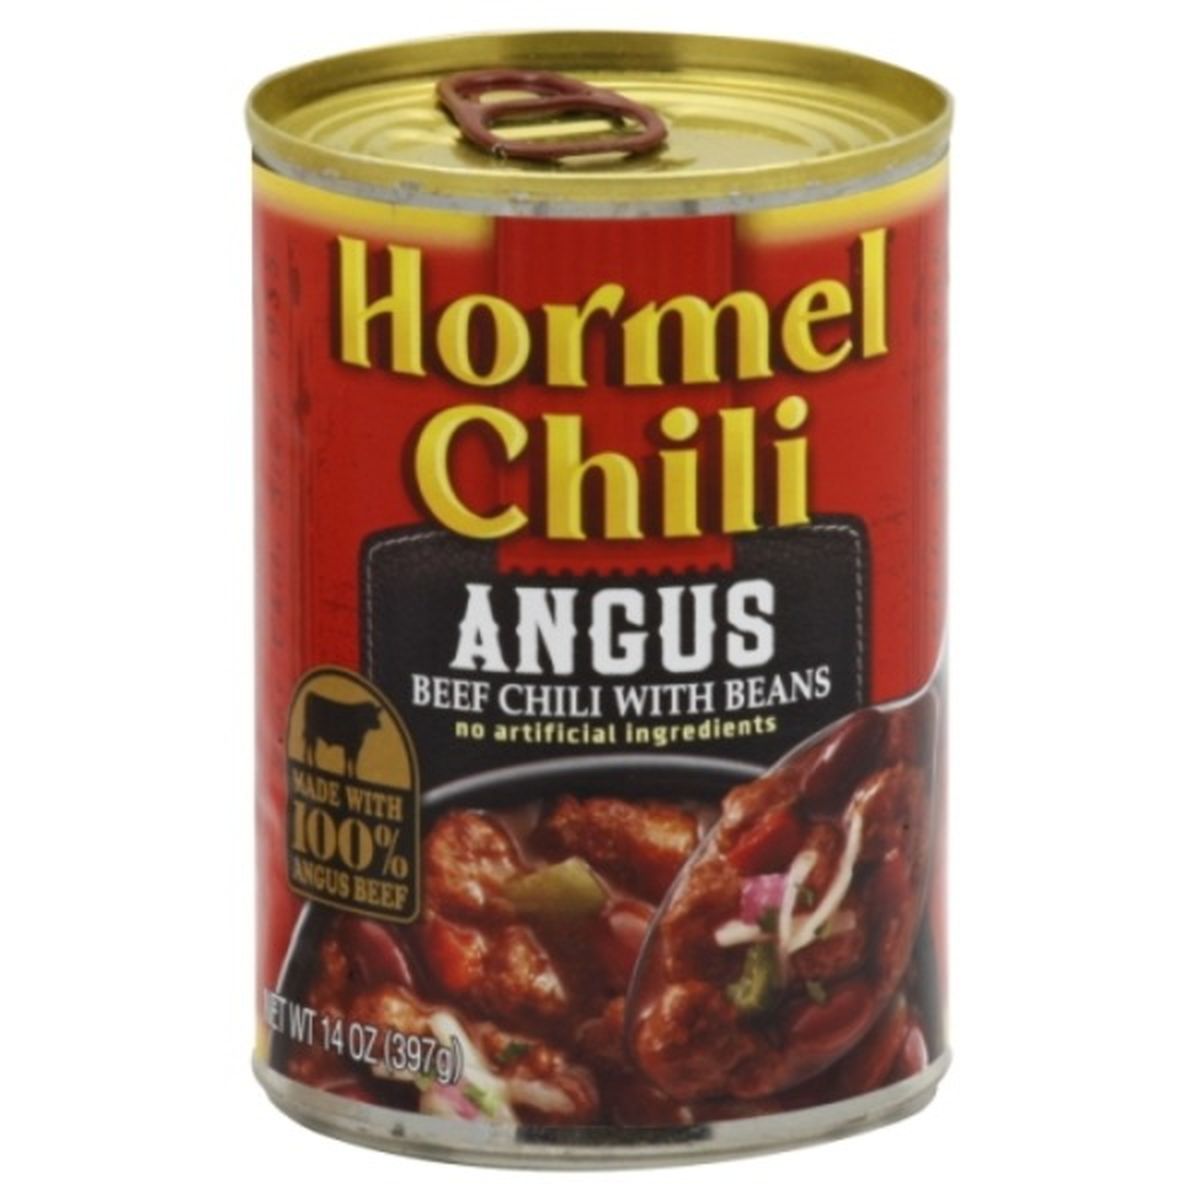 Calories in Hormel Chili, Angus